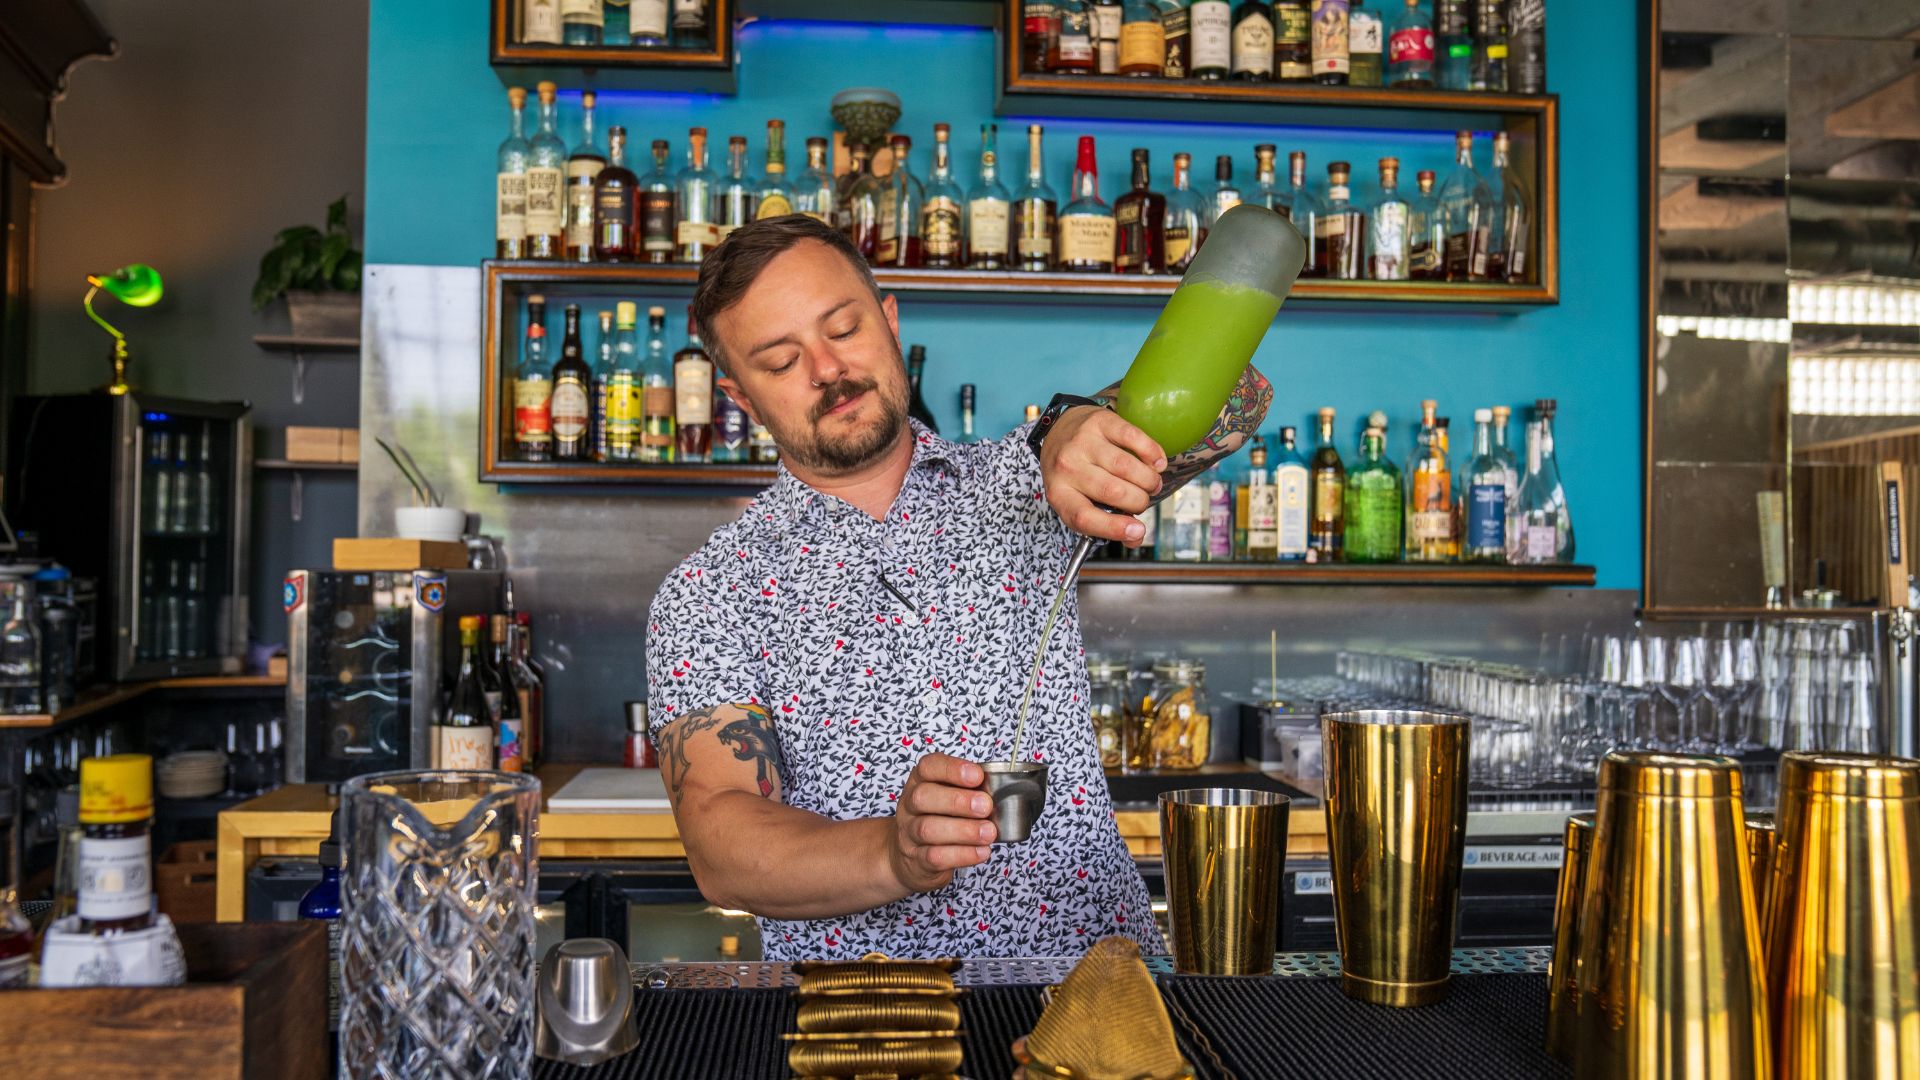 Corey Moszer mixes drinks behind the bar of The Lucky Accomplice